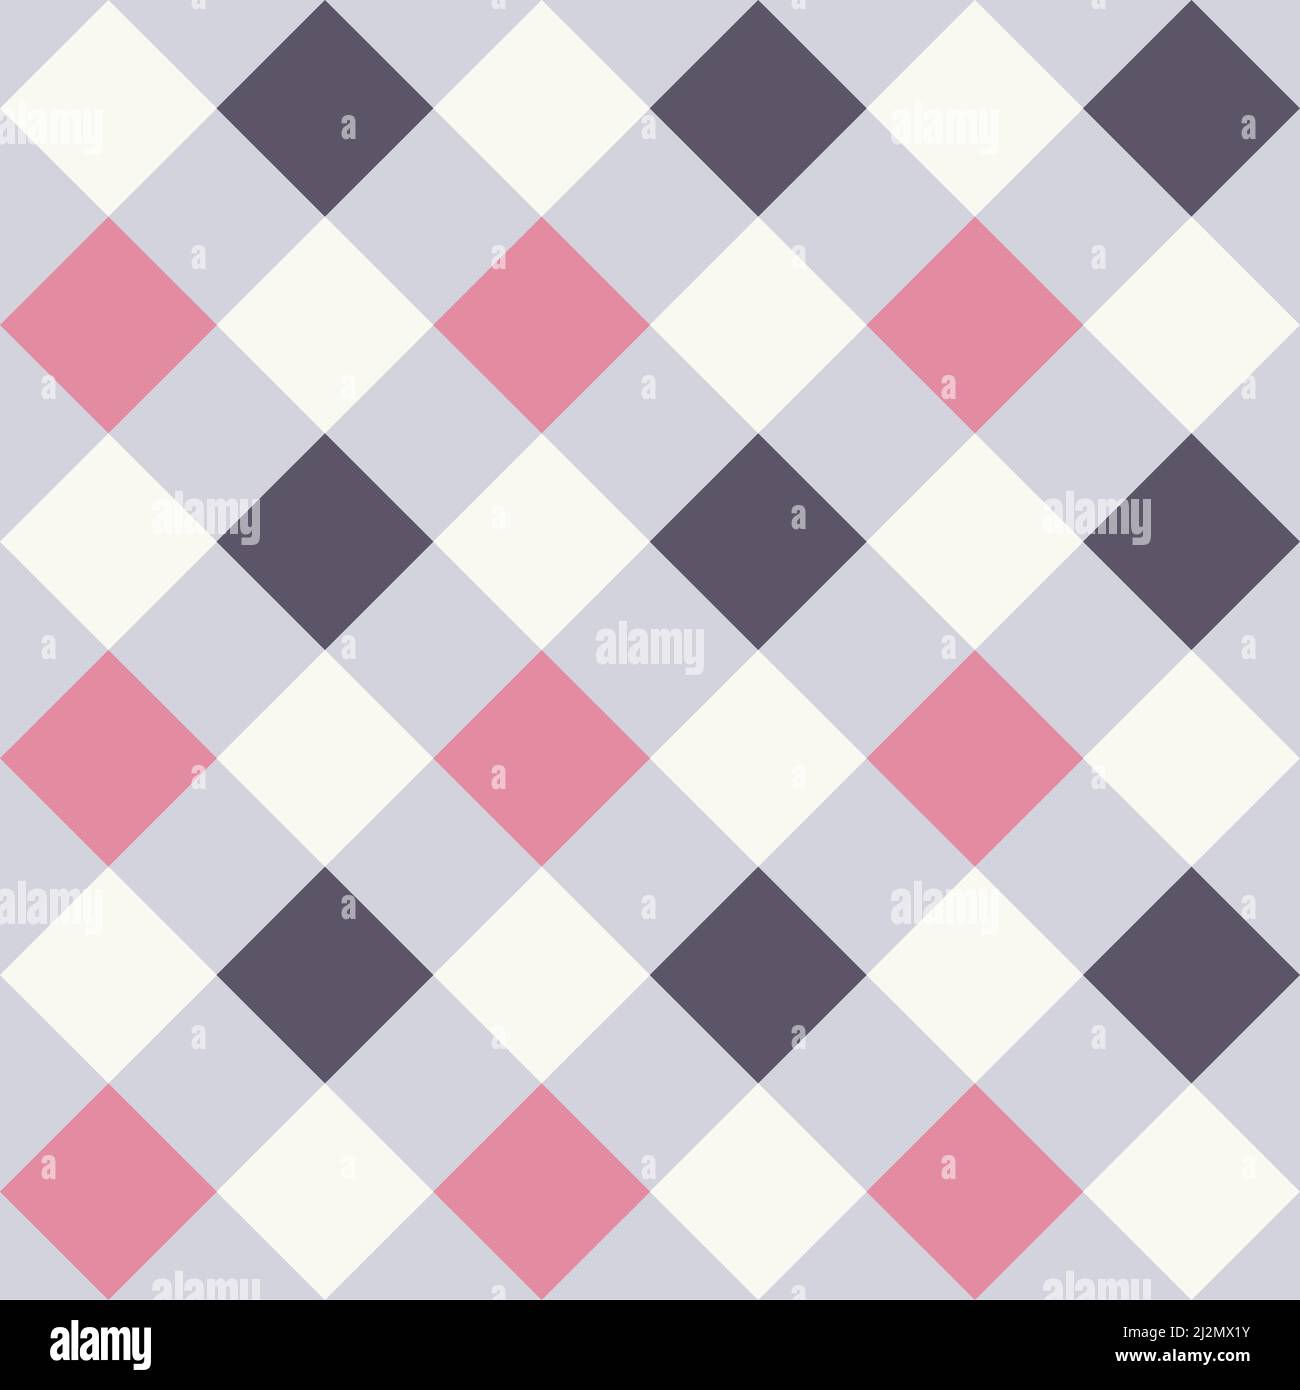 Check Pattern Design In Pink Grey Slate Color Stock Vector